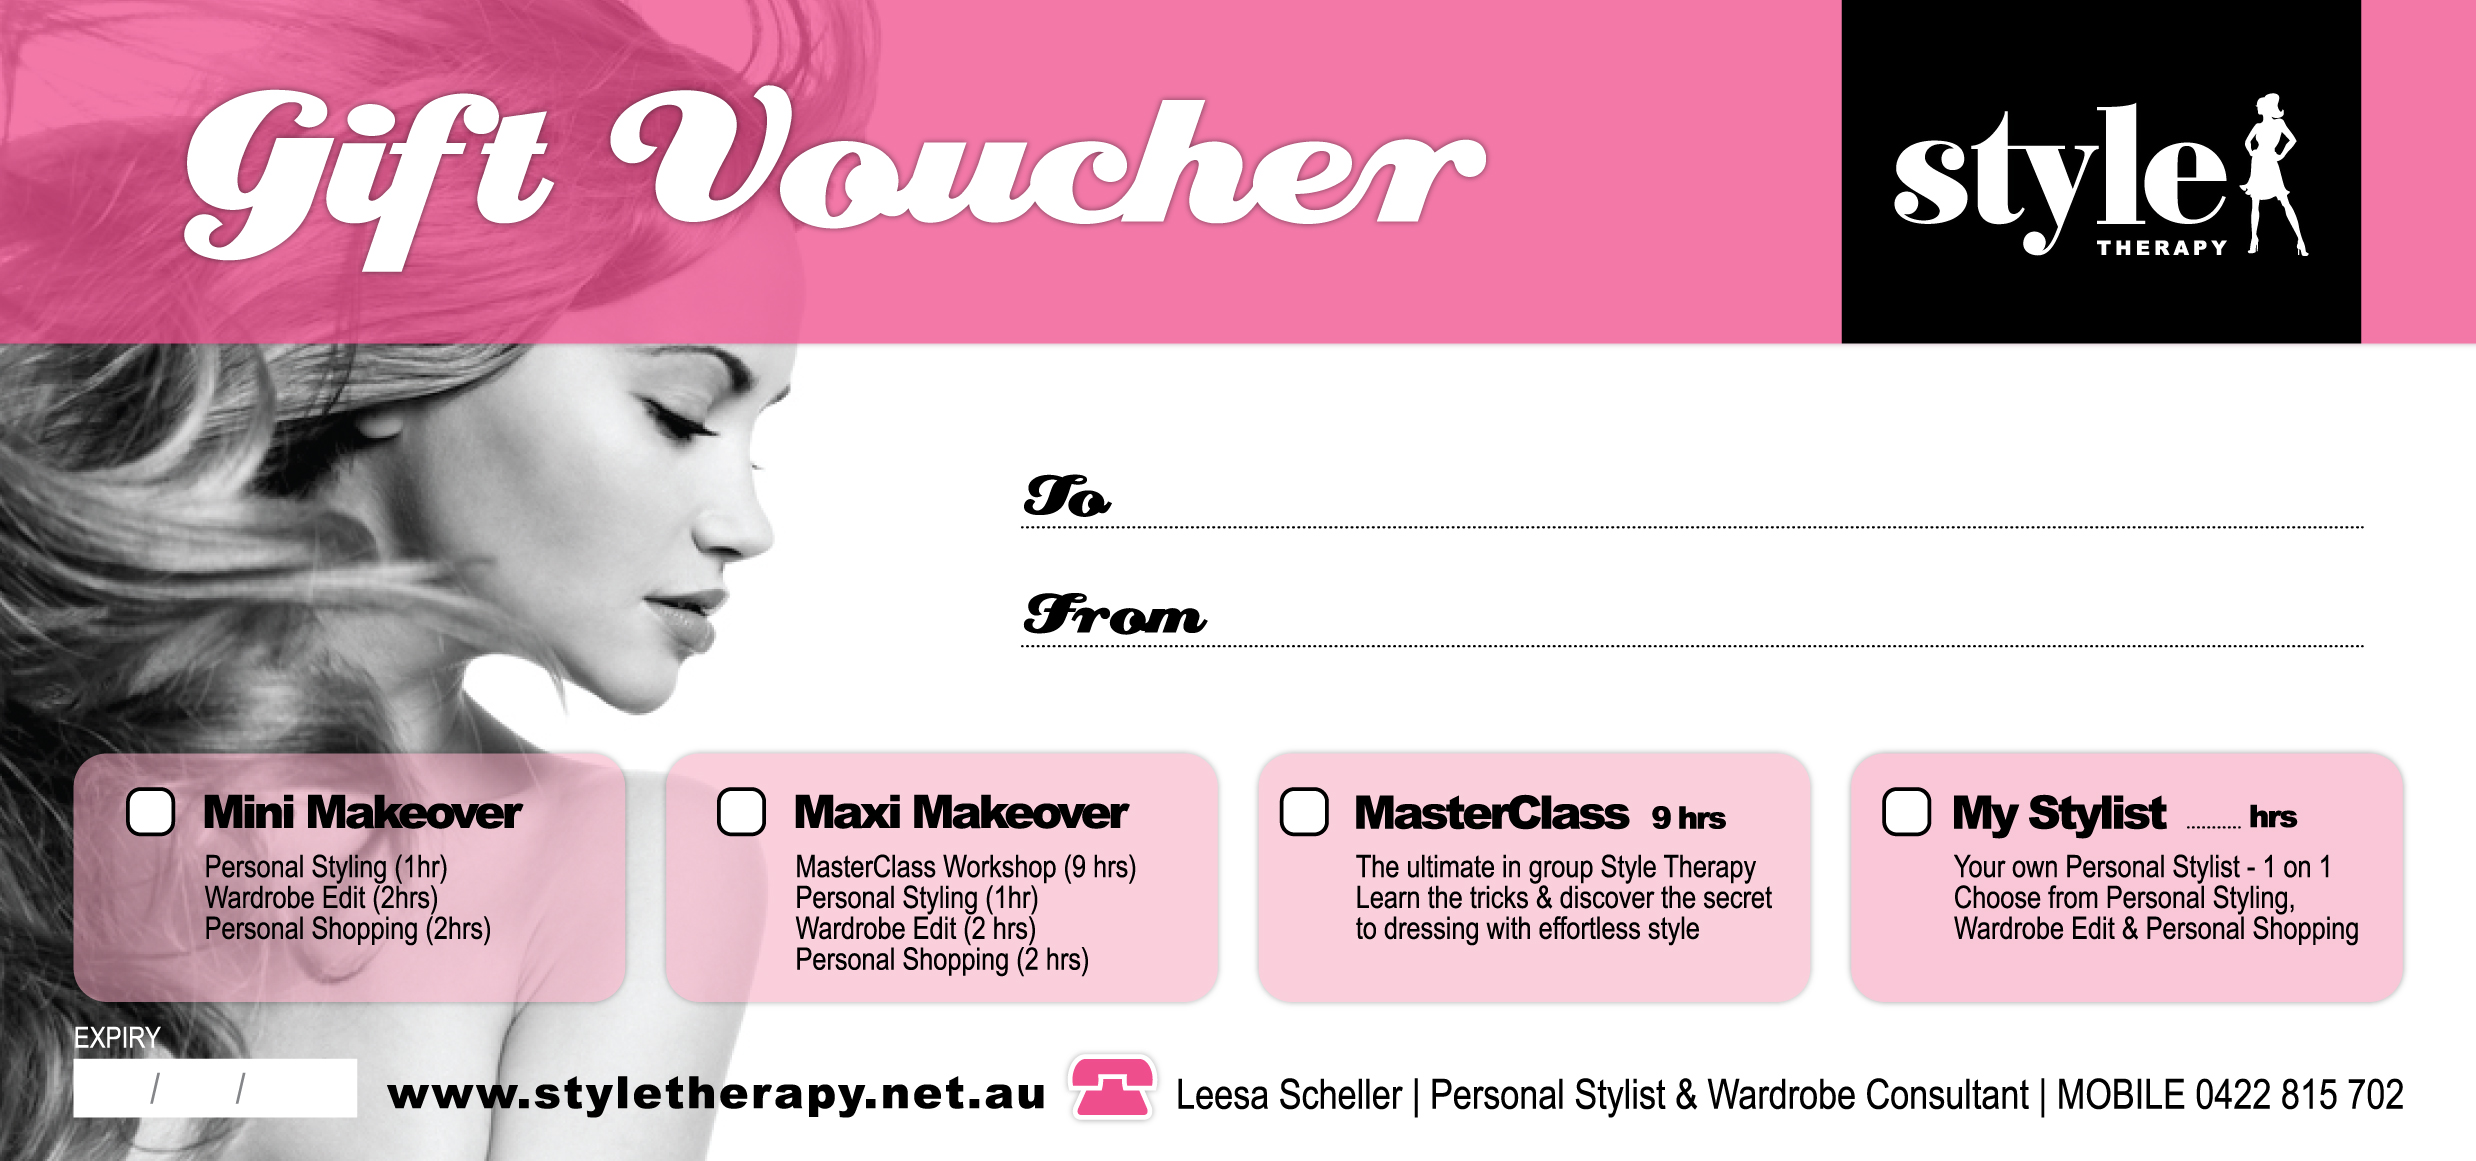 style_therapy_gift_voucher.jpg